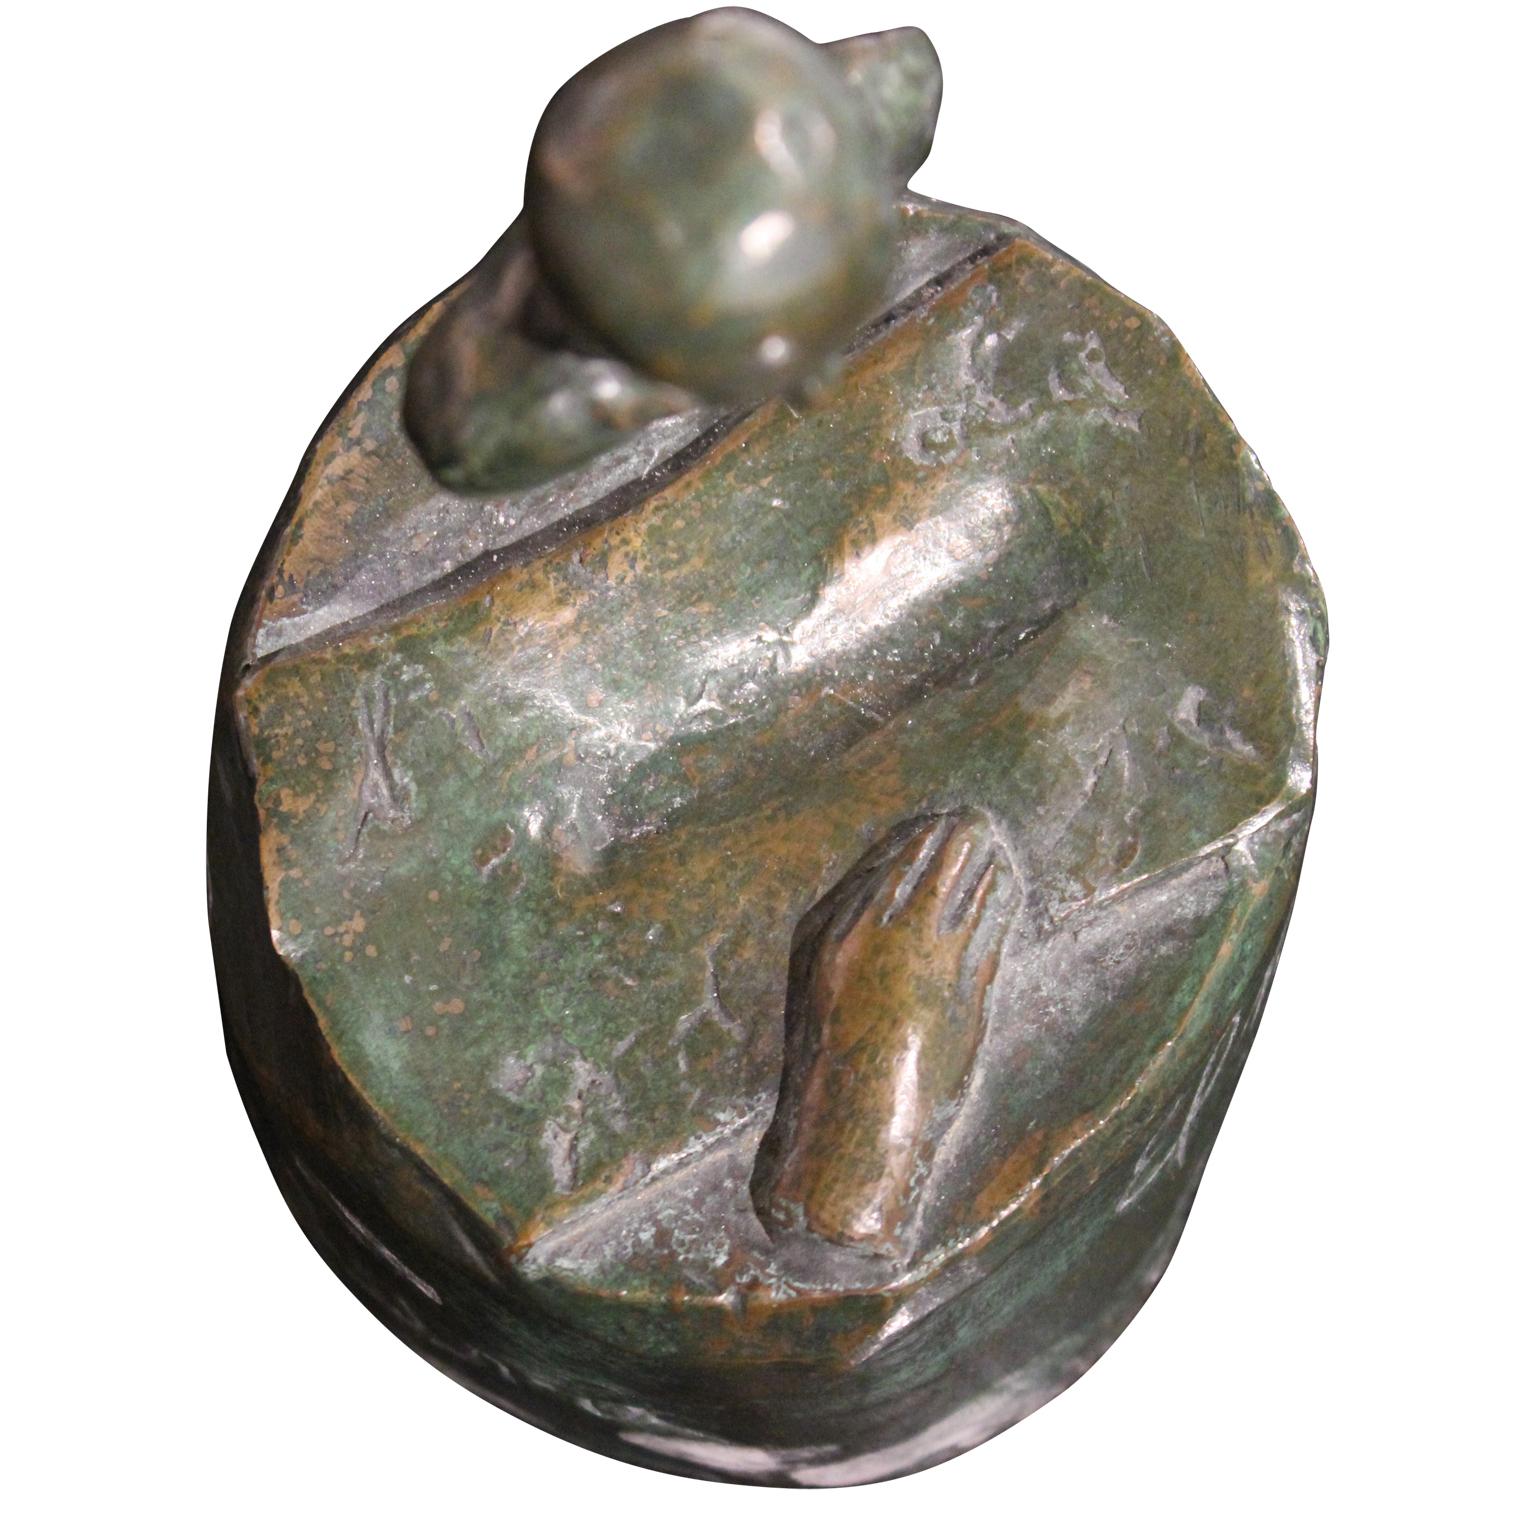 Surrealist bronze sculpture of a figure hovering above the water looking at a disembodied hand. On the base there is the phrase 